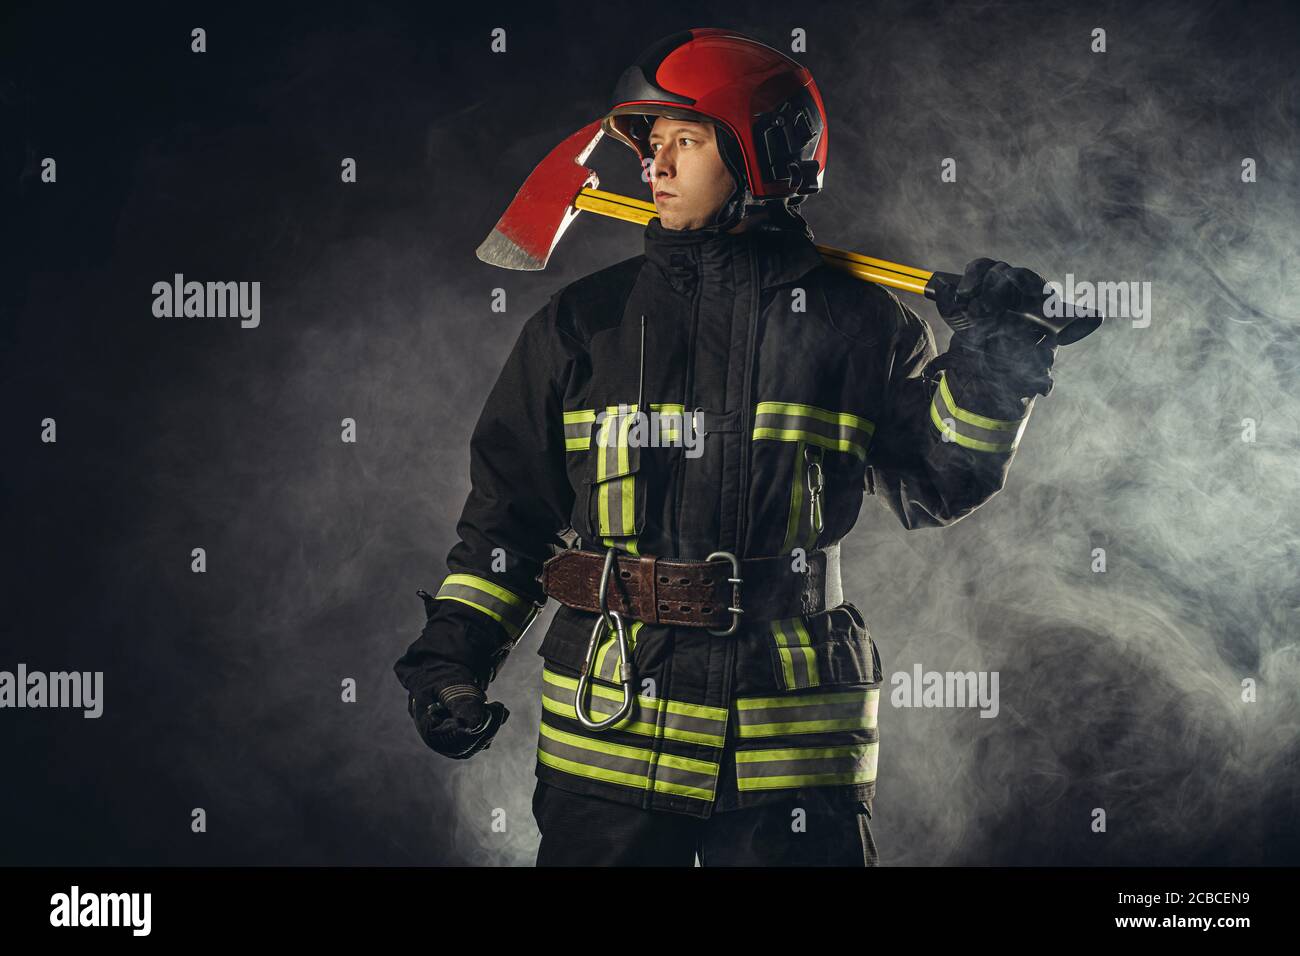 reverent, confident man working in fire station ready to save people from fire in emergency situations, wearing uniform and helmet Stock Photo